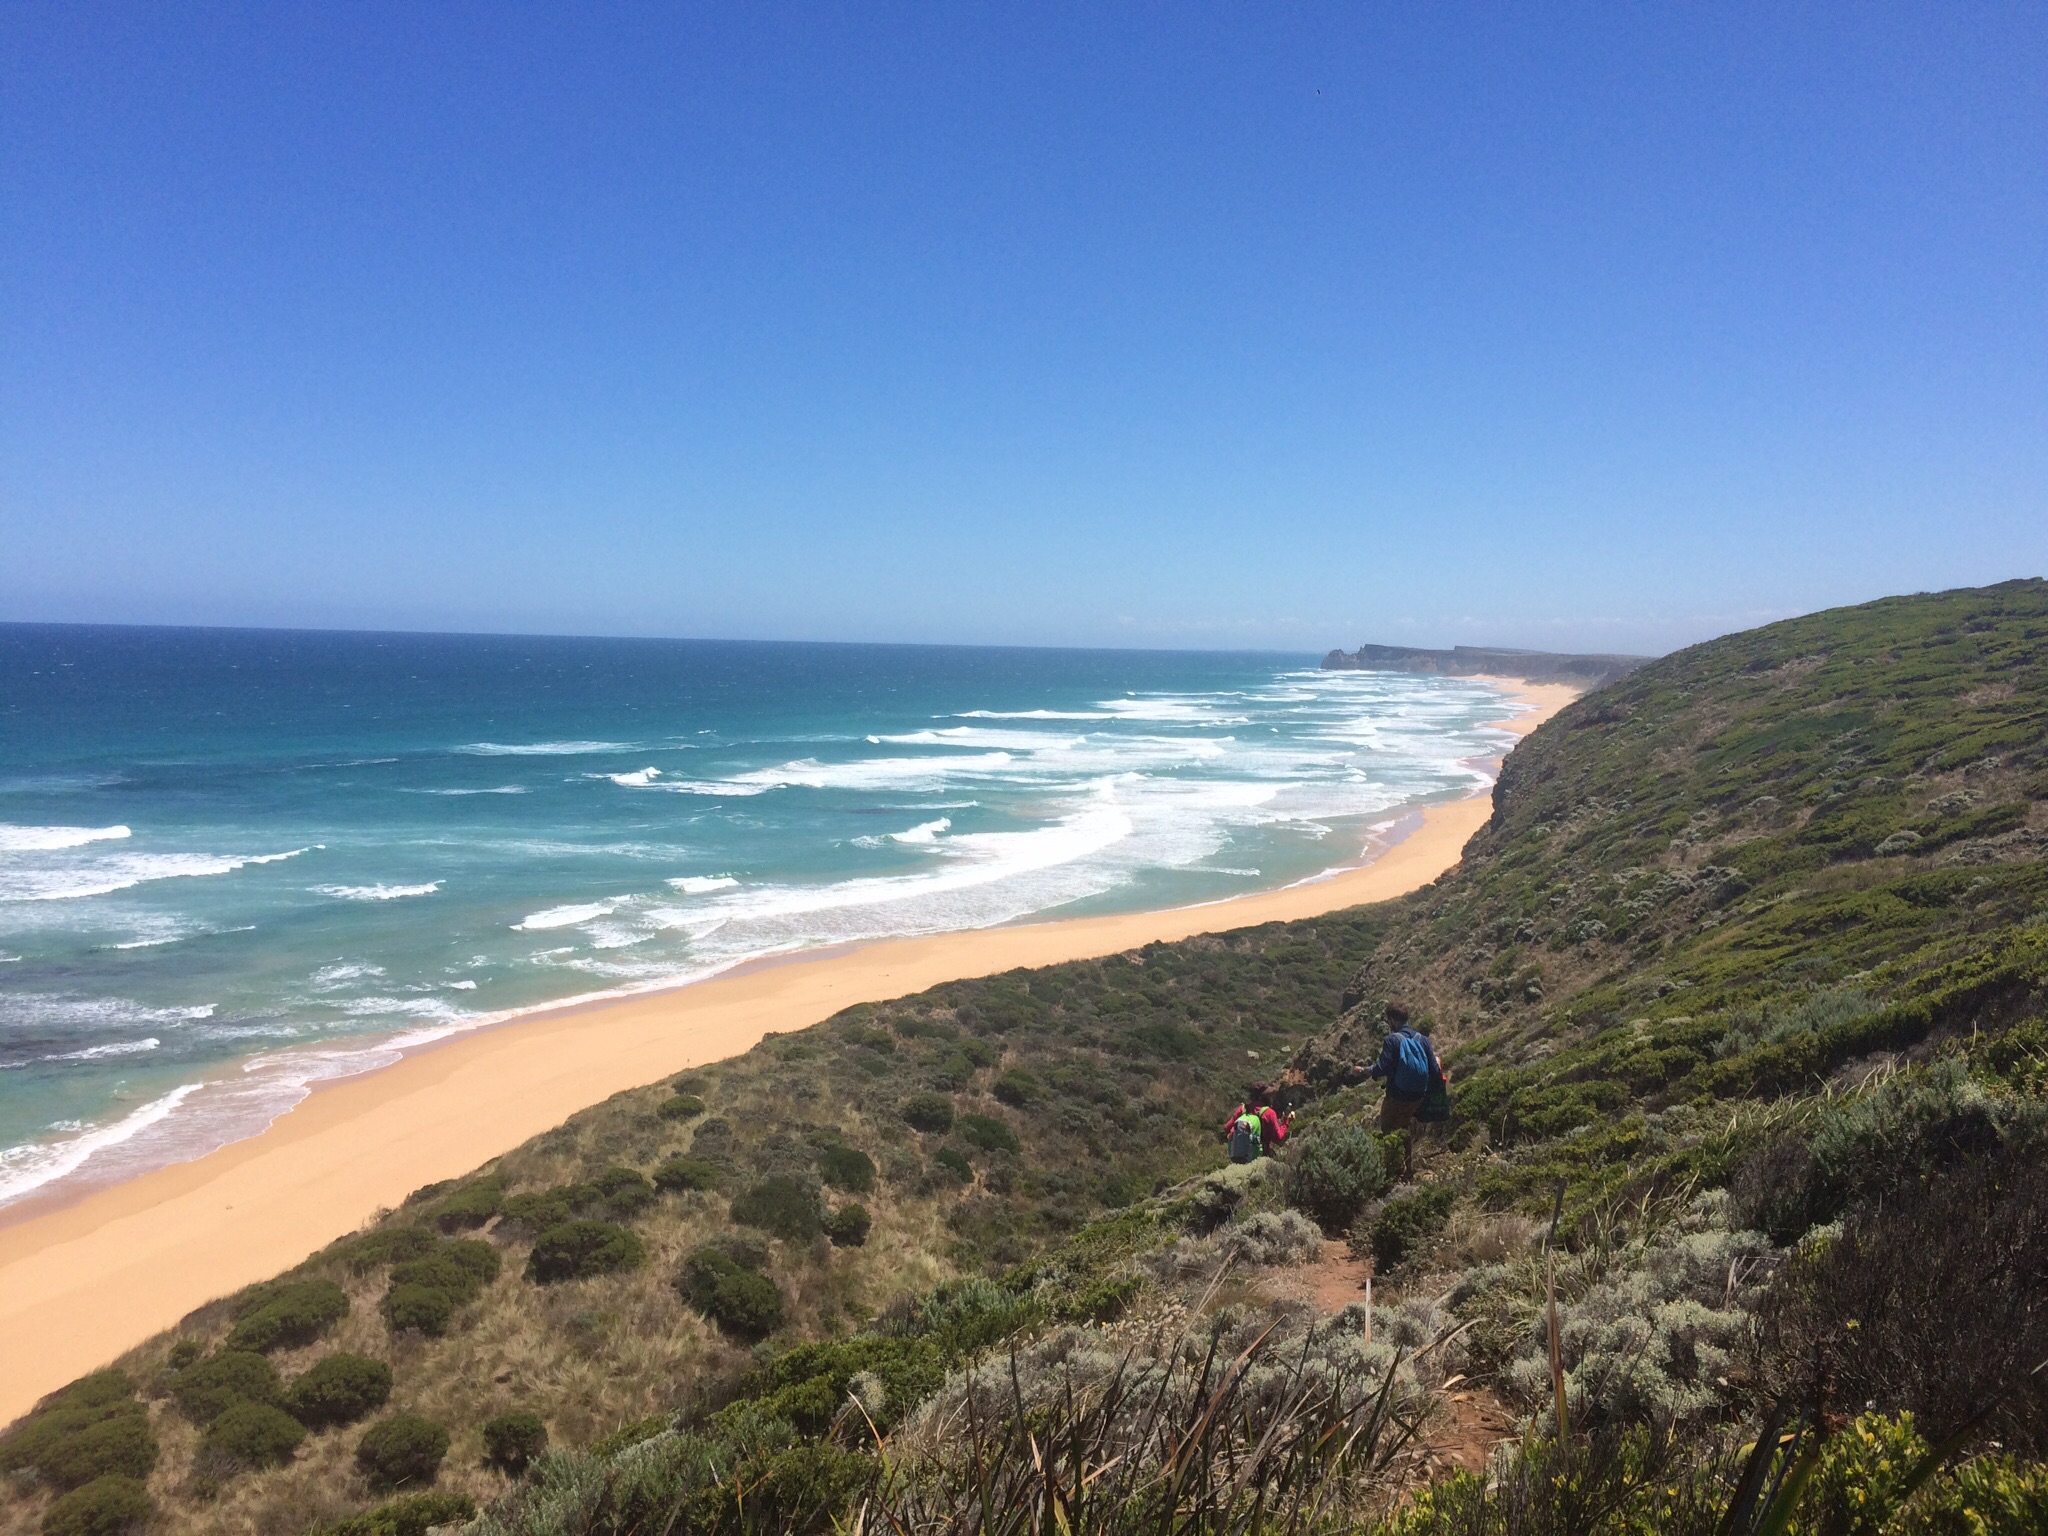 A steep descent to our own private beach, Great Ocean Road